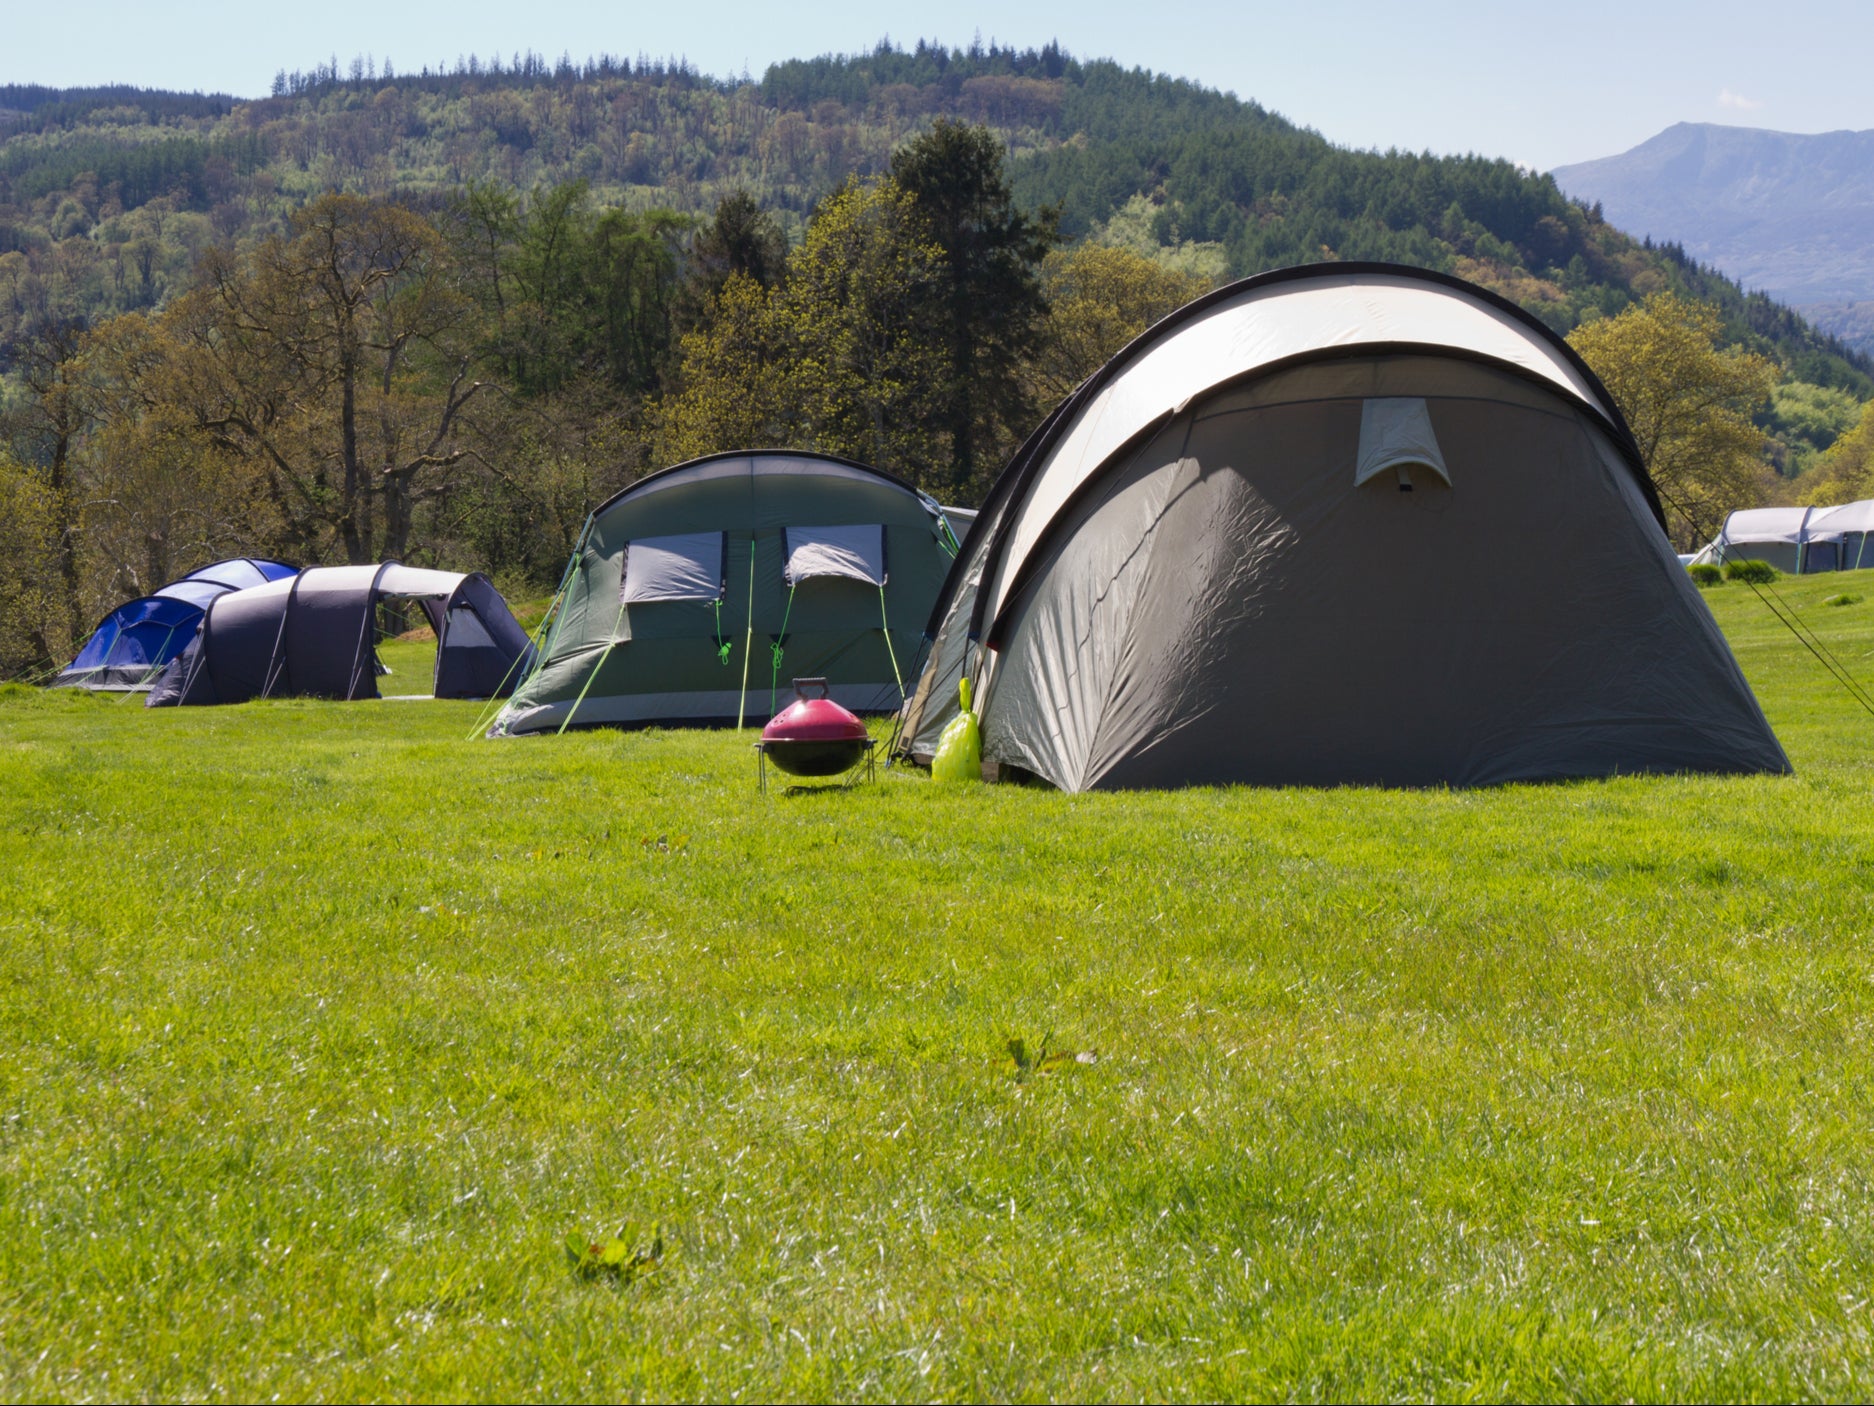 Snowdonia is a popular camping location